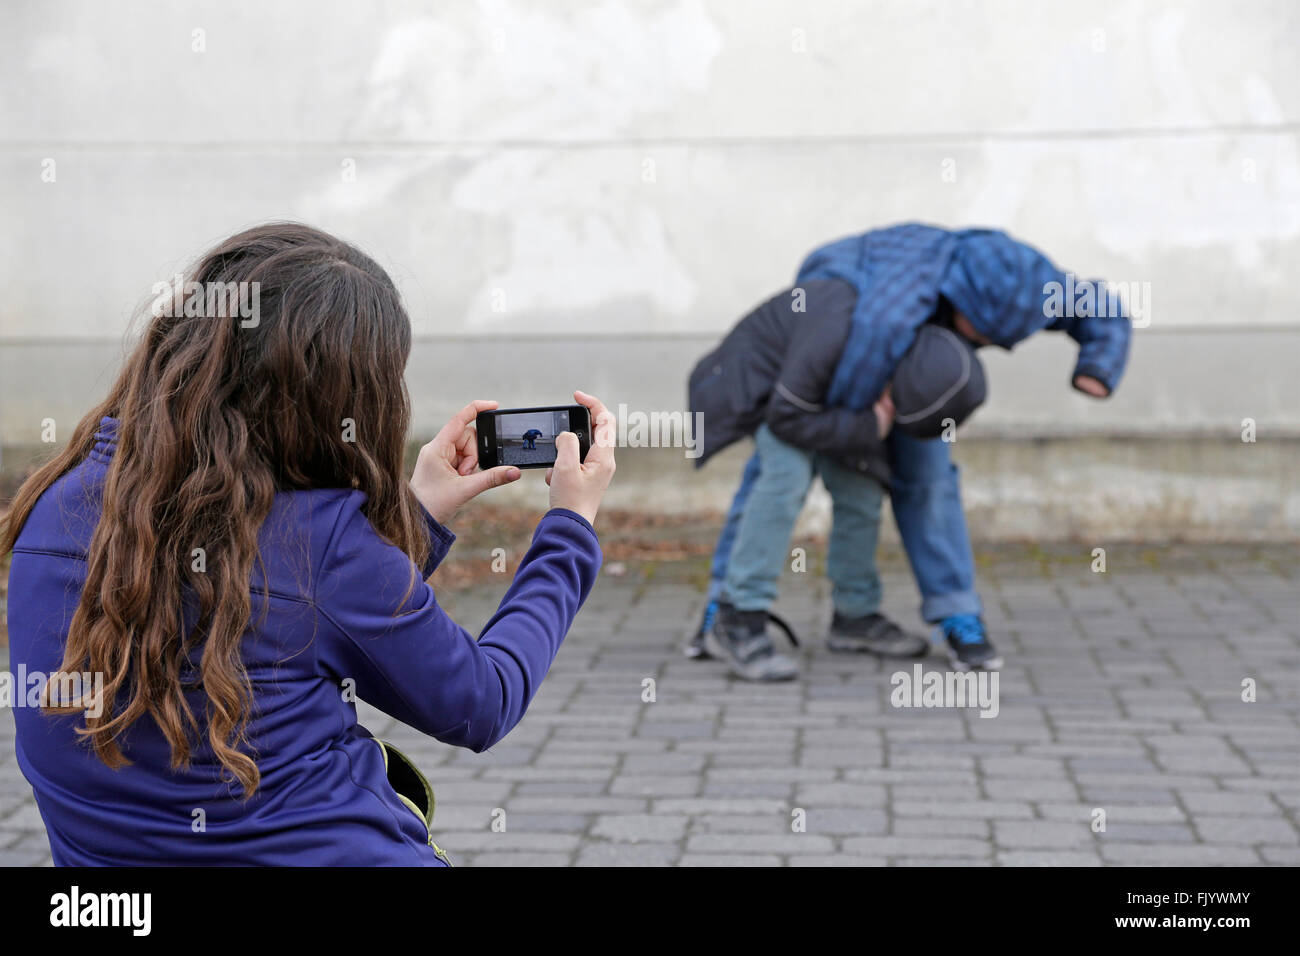 two kids fighting, third one making video with smartphone Stock Photo